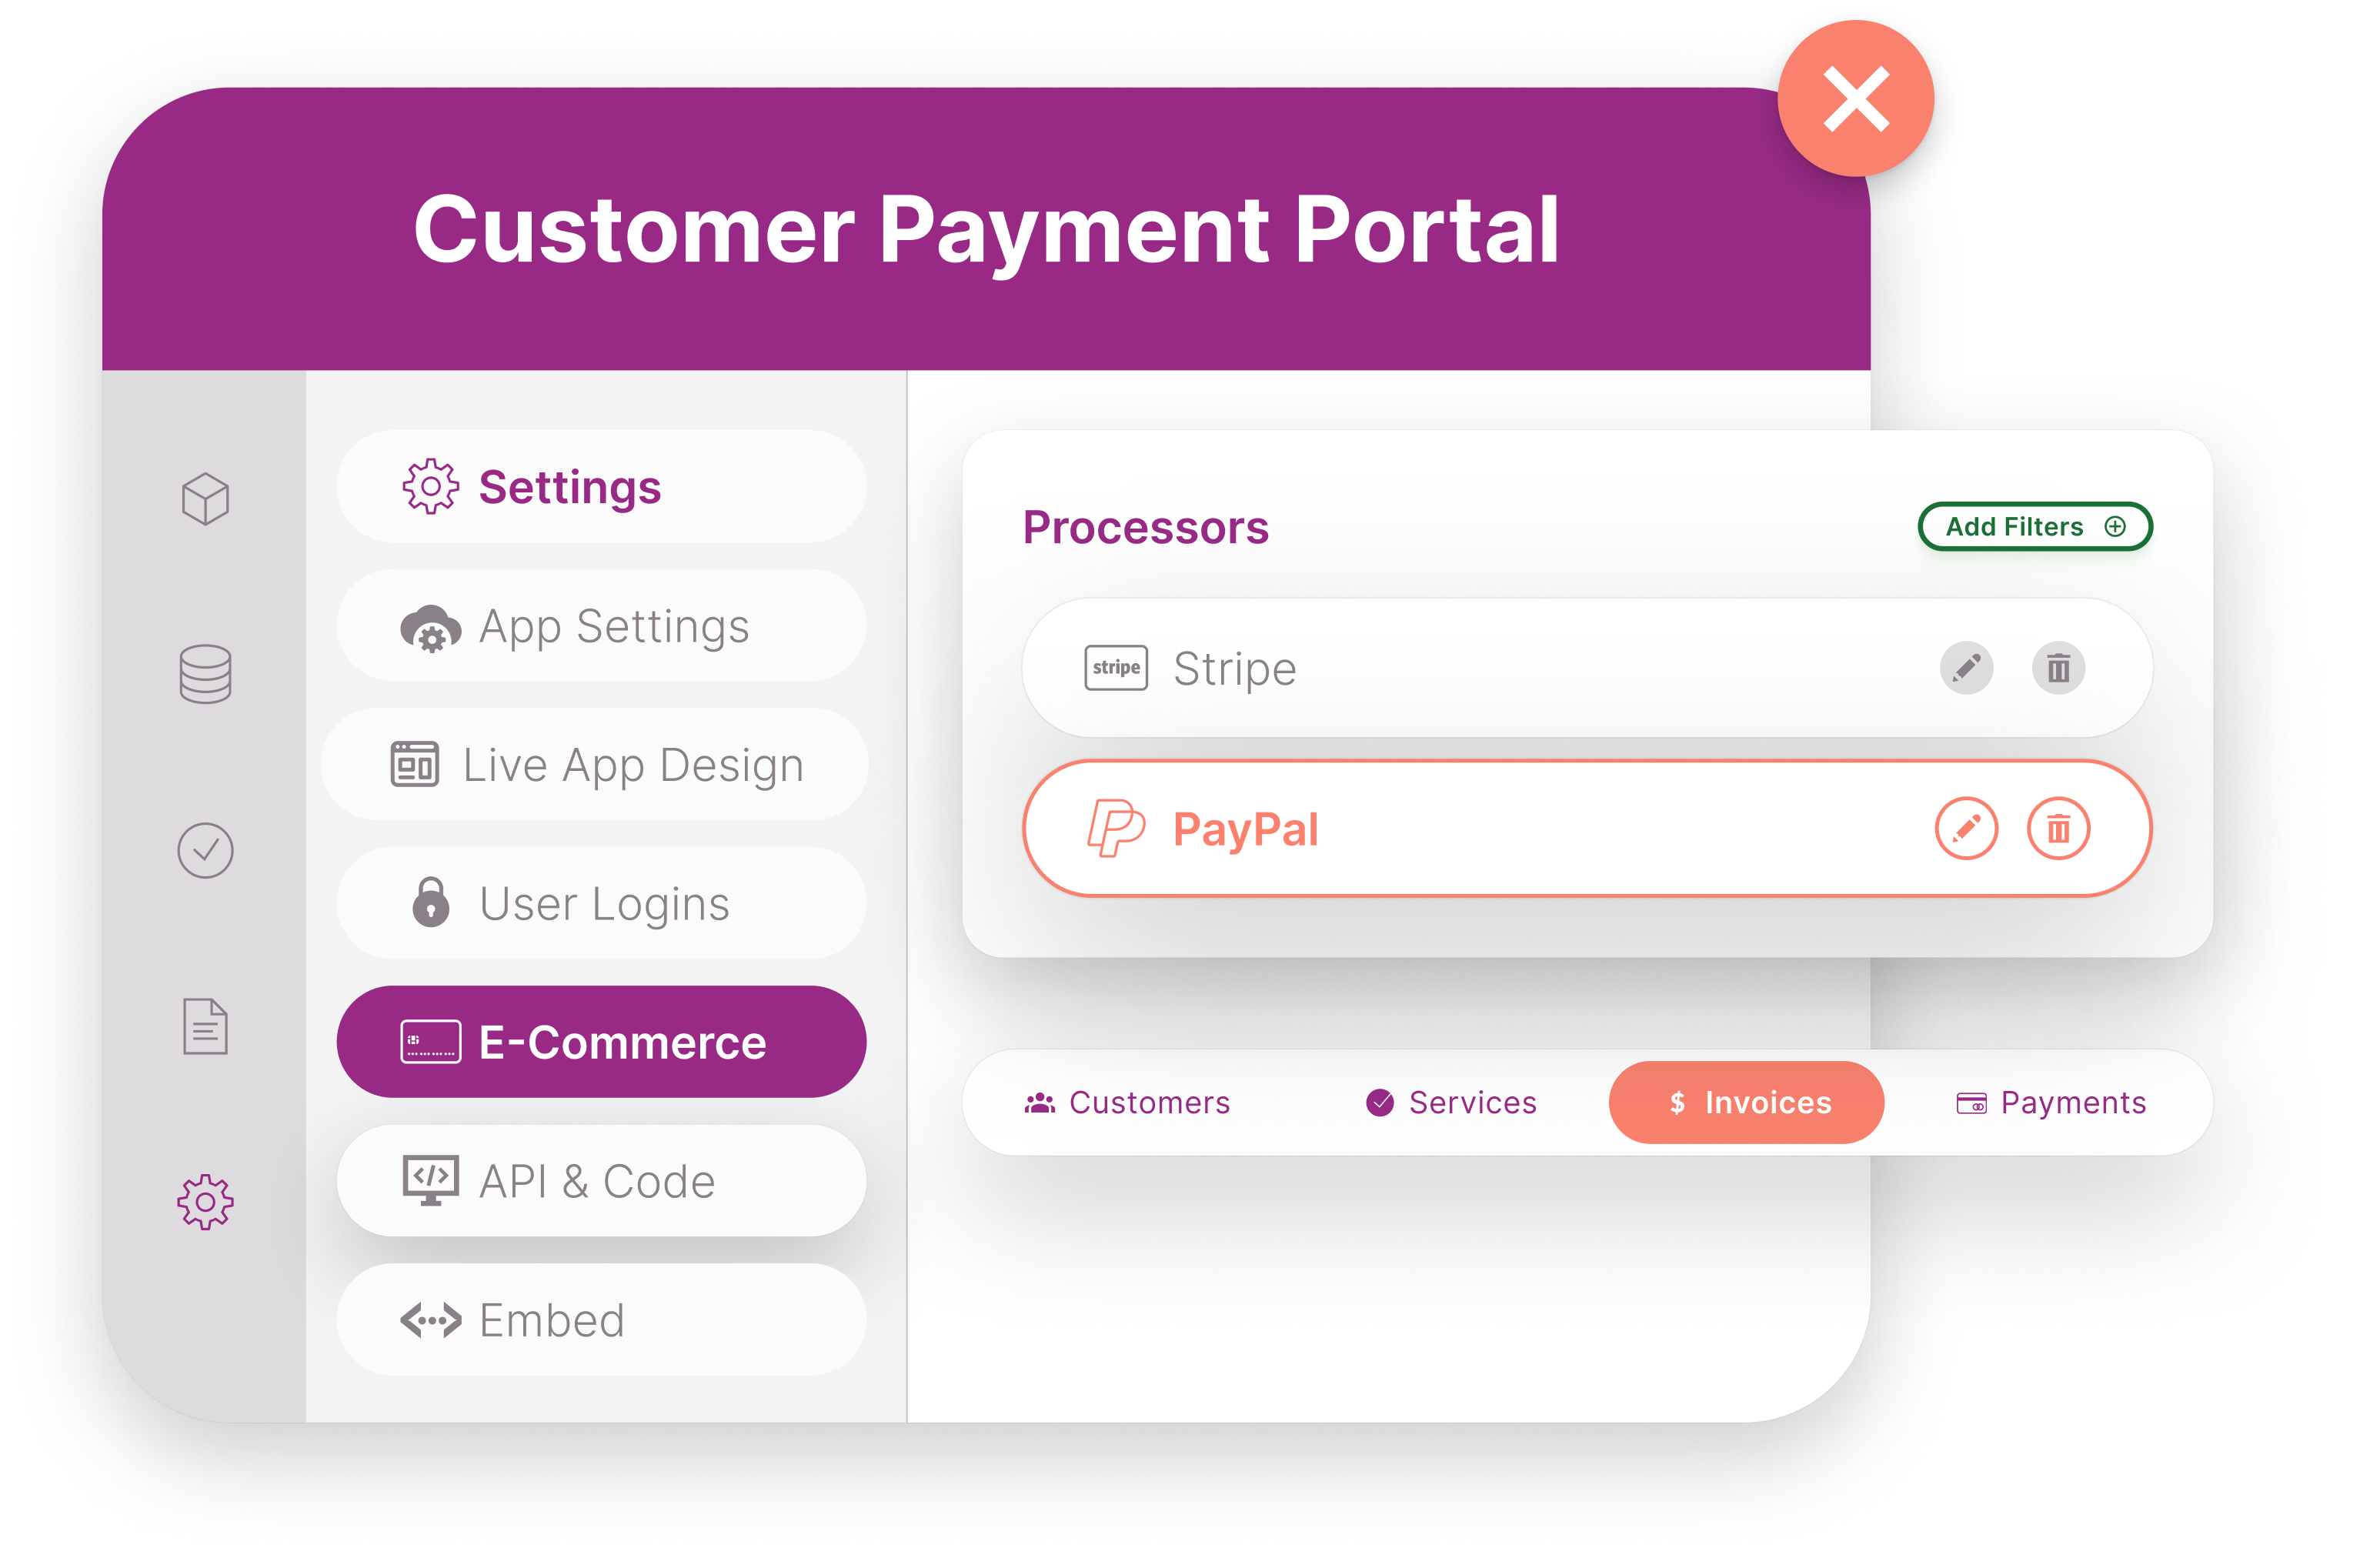 A view of the services and invoices dashboard in the customer portal app